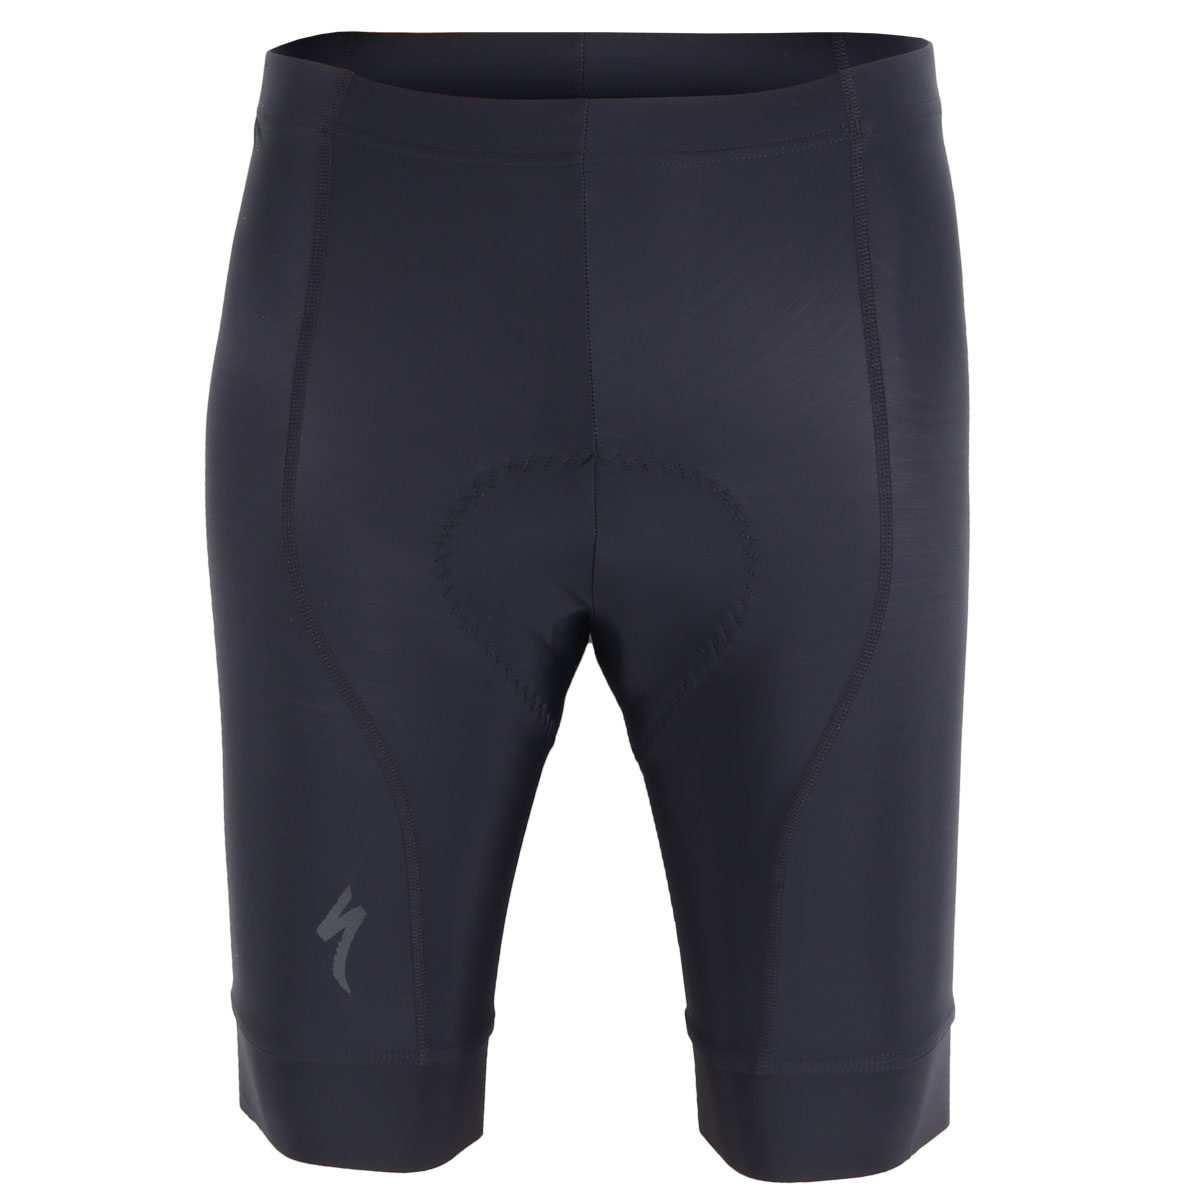 Image of Specialized RBX Shorts - black